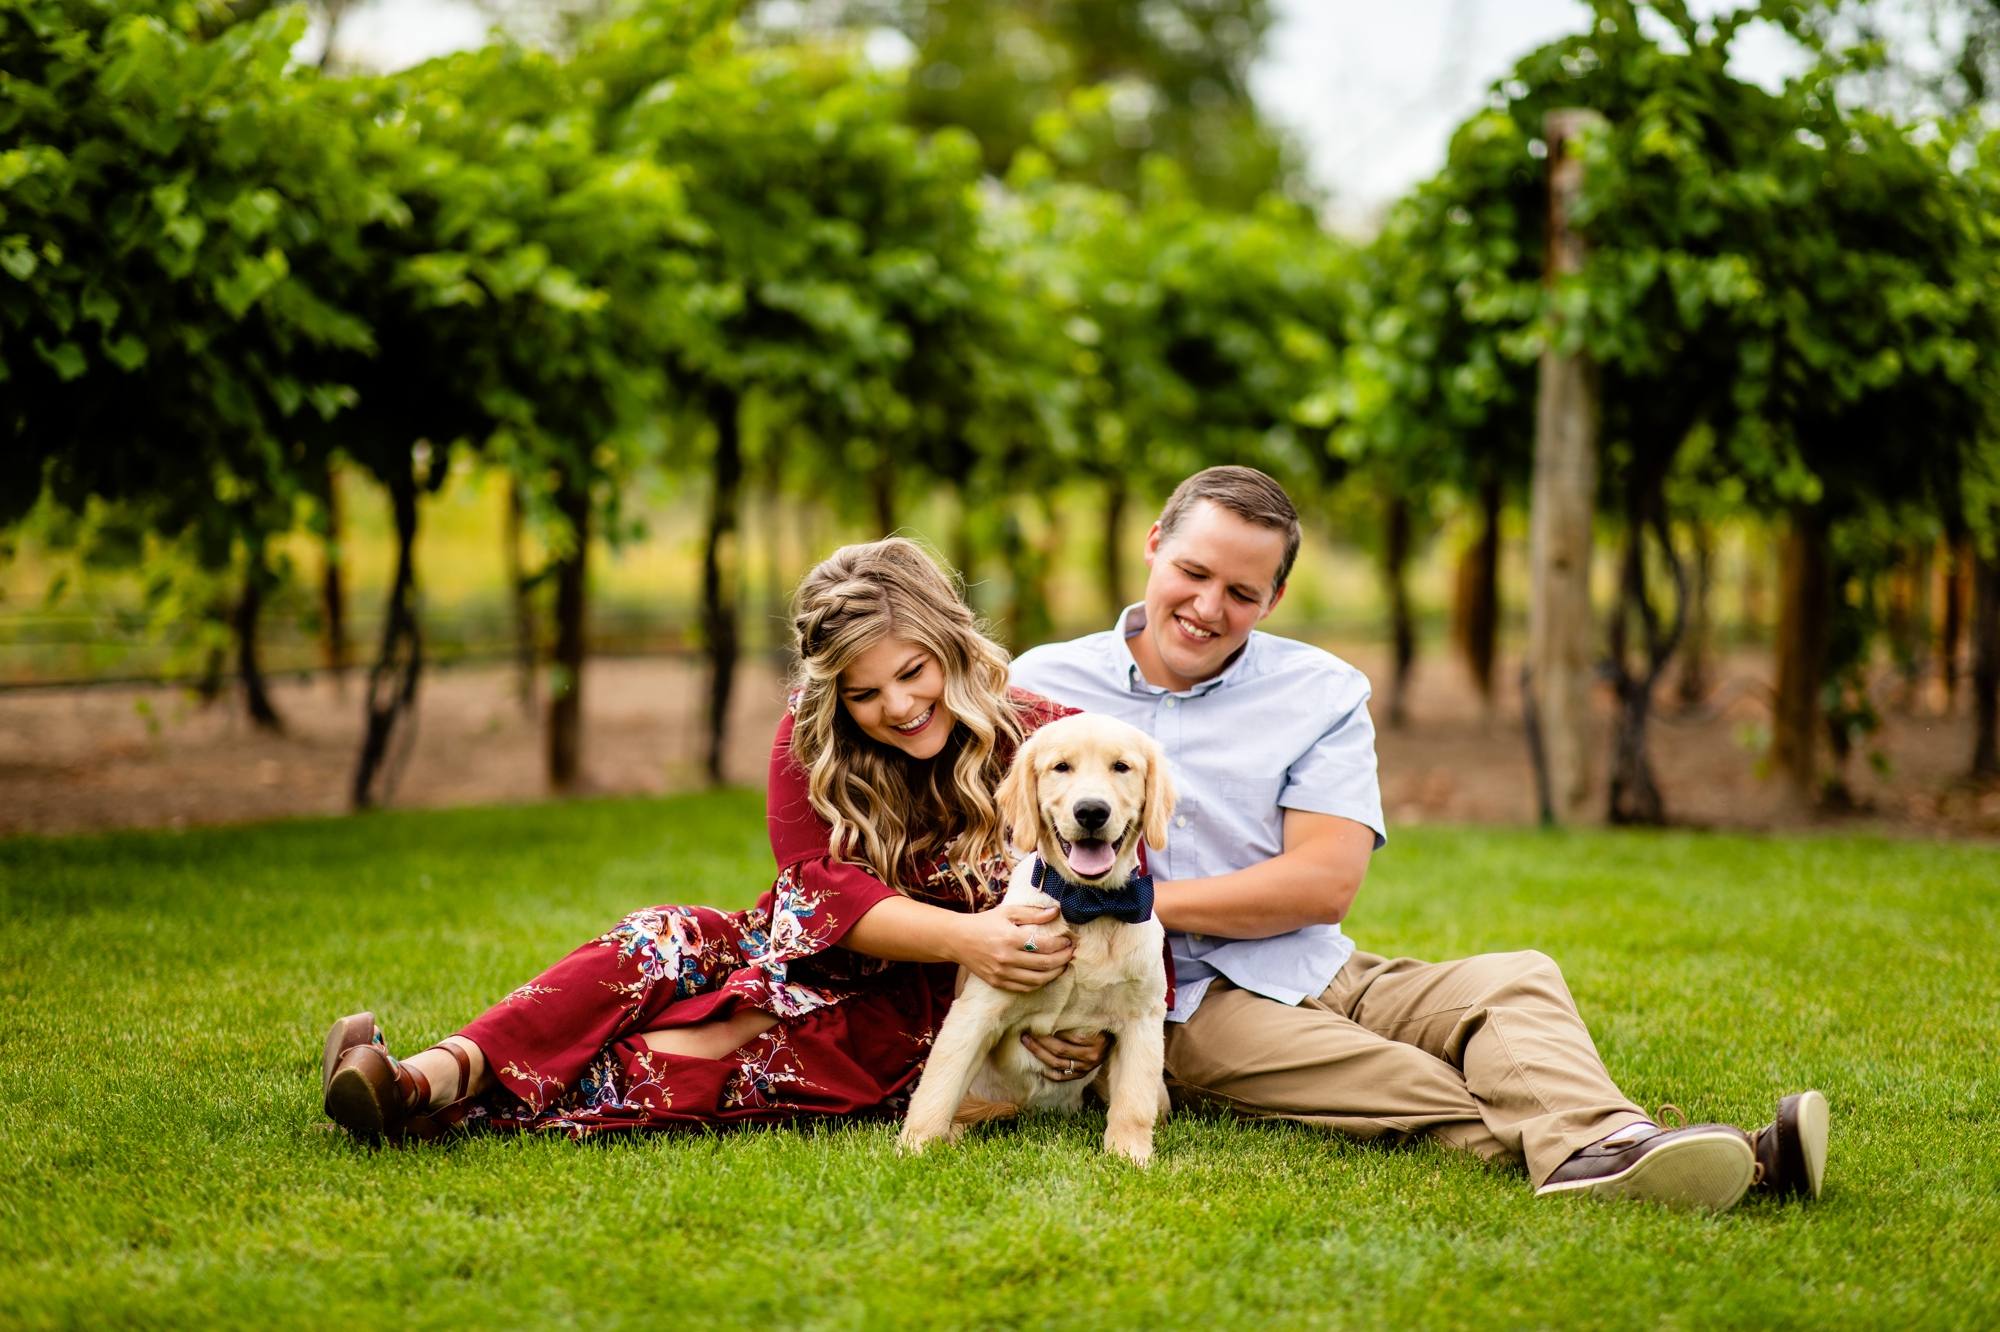 Anniversary Portraits taken at River Garden Winery in Fort Lupton, Colorado with golden retriever puppy.